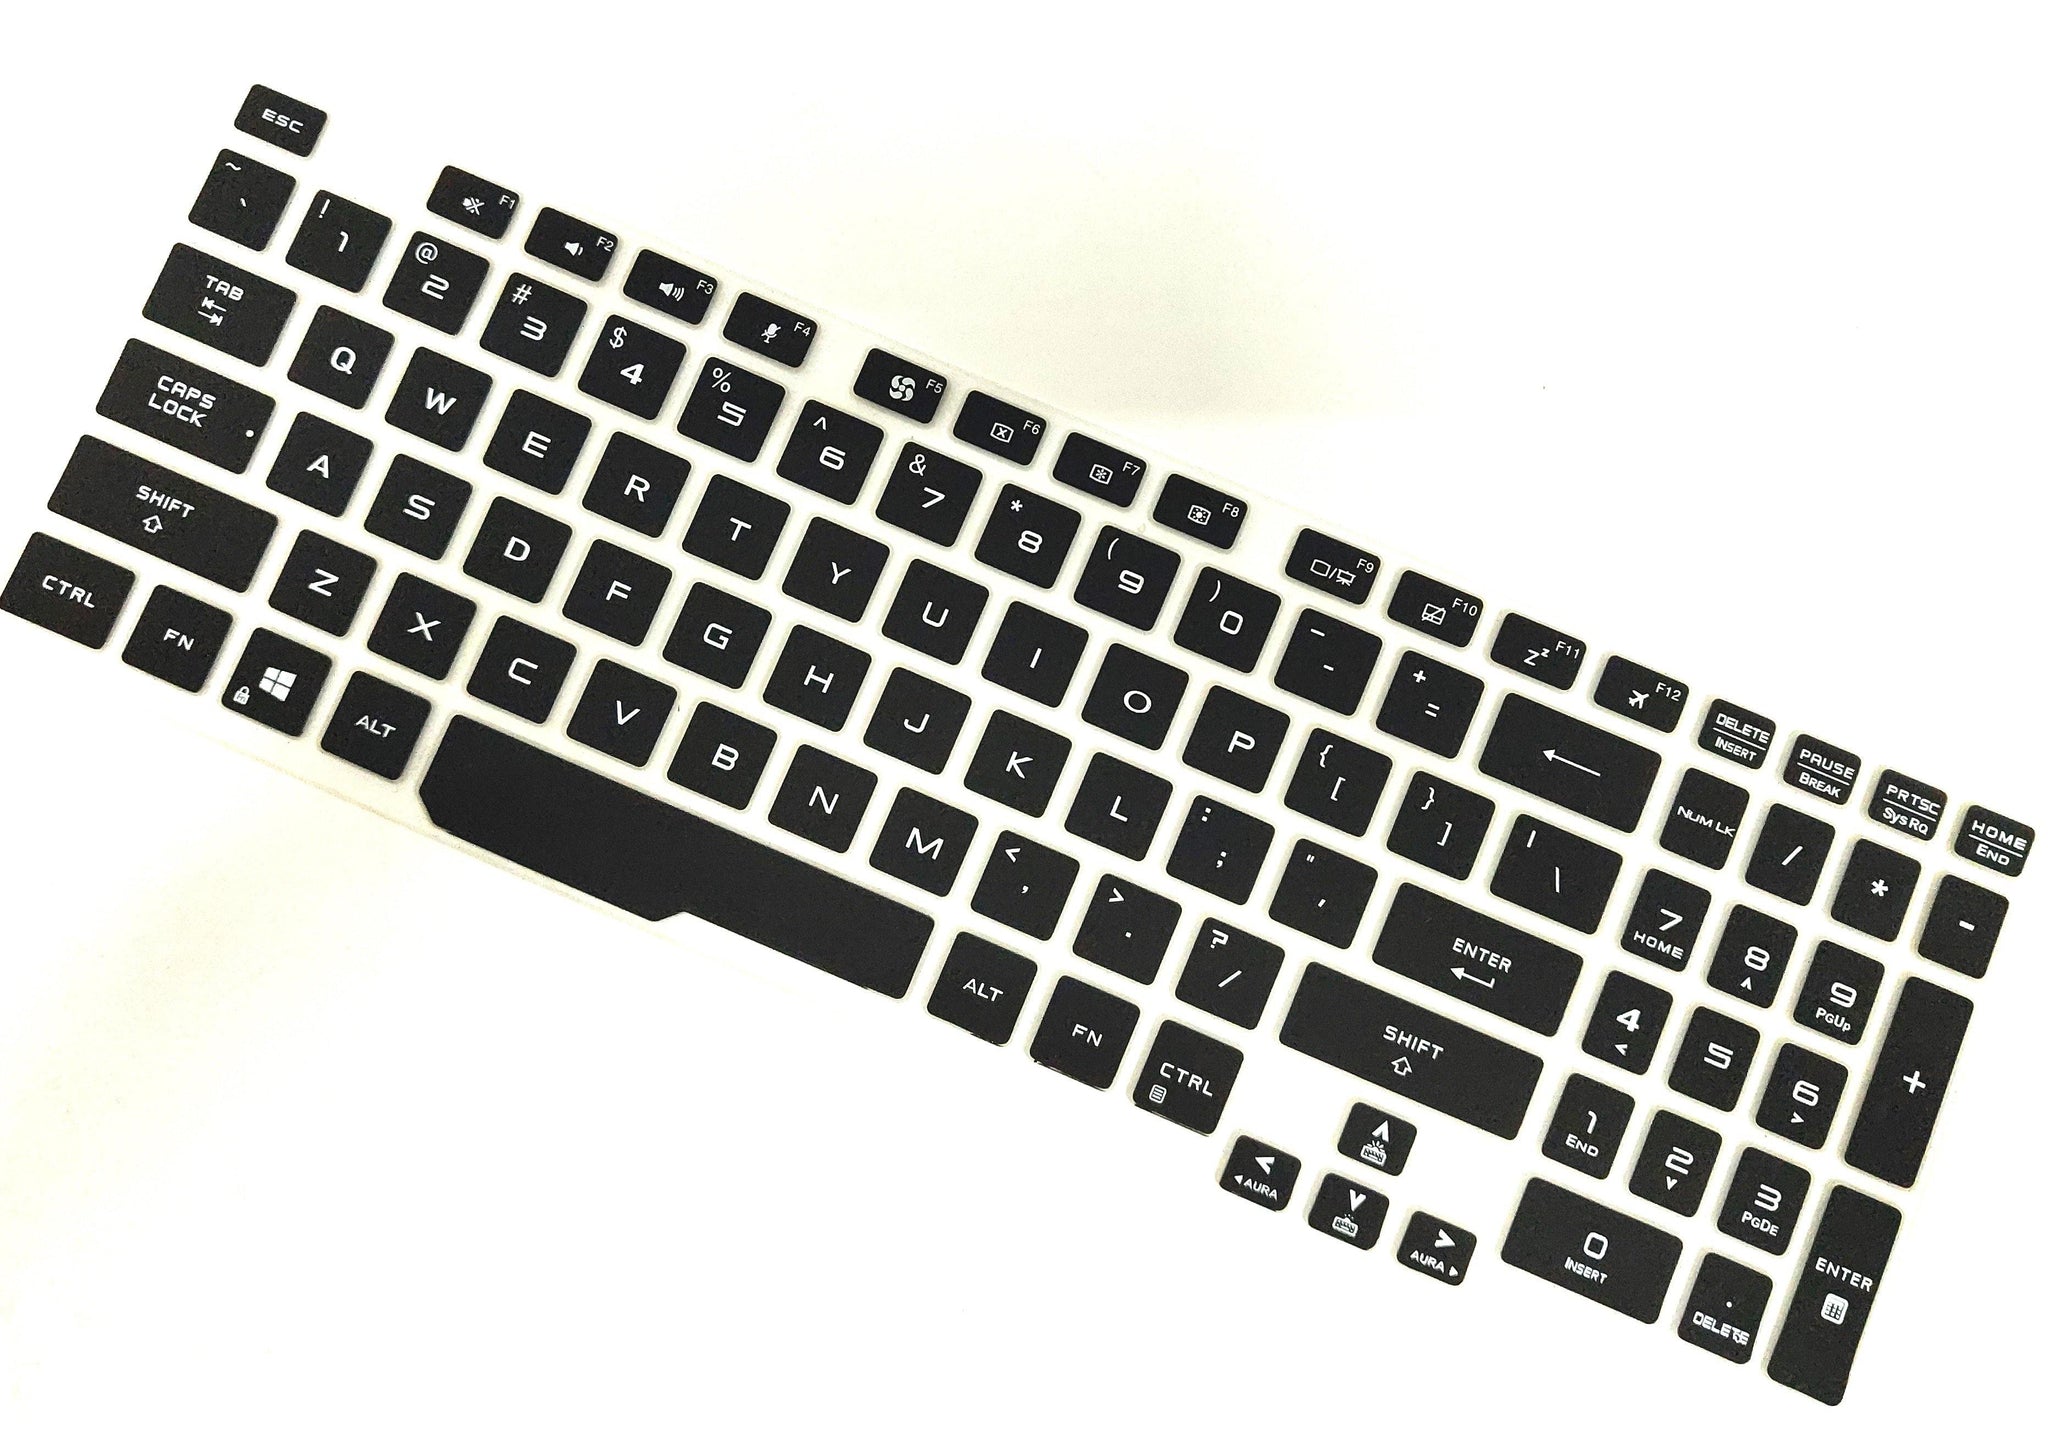 Silicone Keyboard Skin Cover for Asus TUF A15 FA506 A17 706 Laptop 2020 (Black) - iFyx